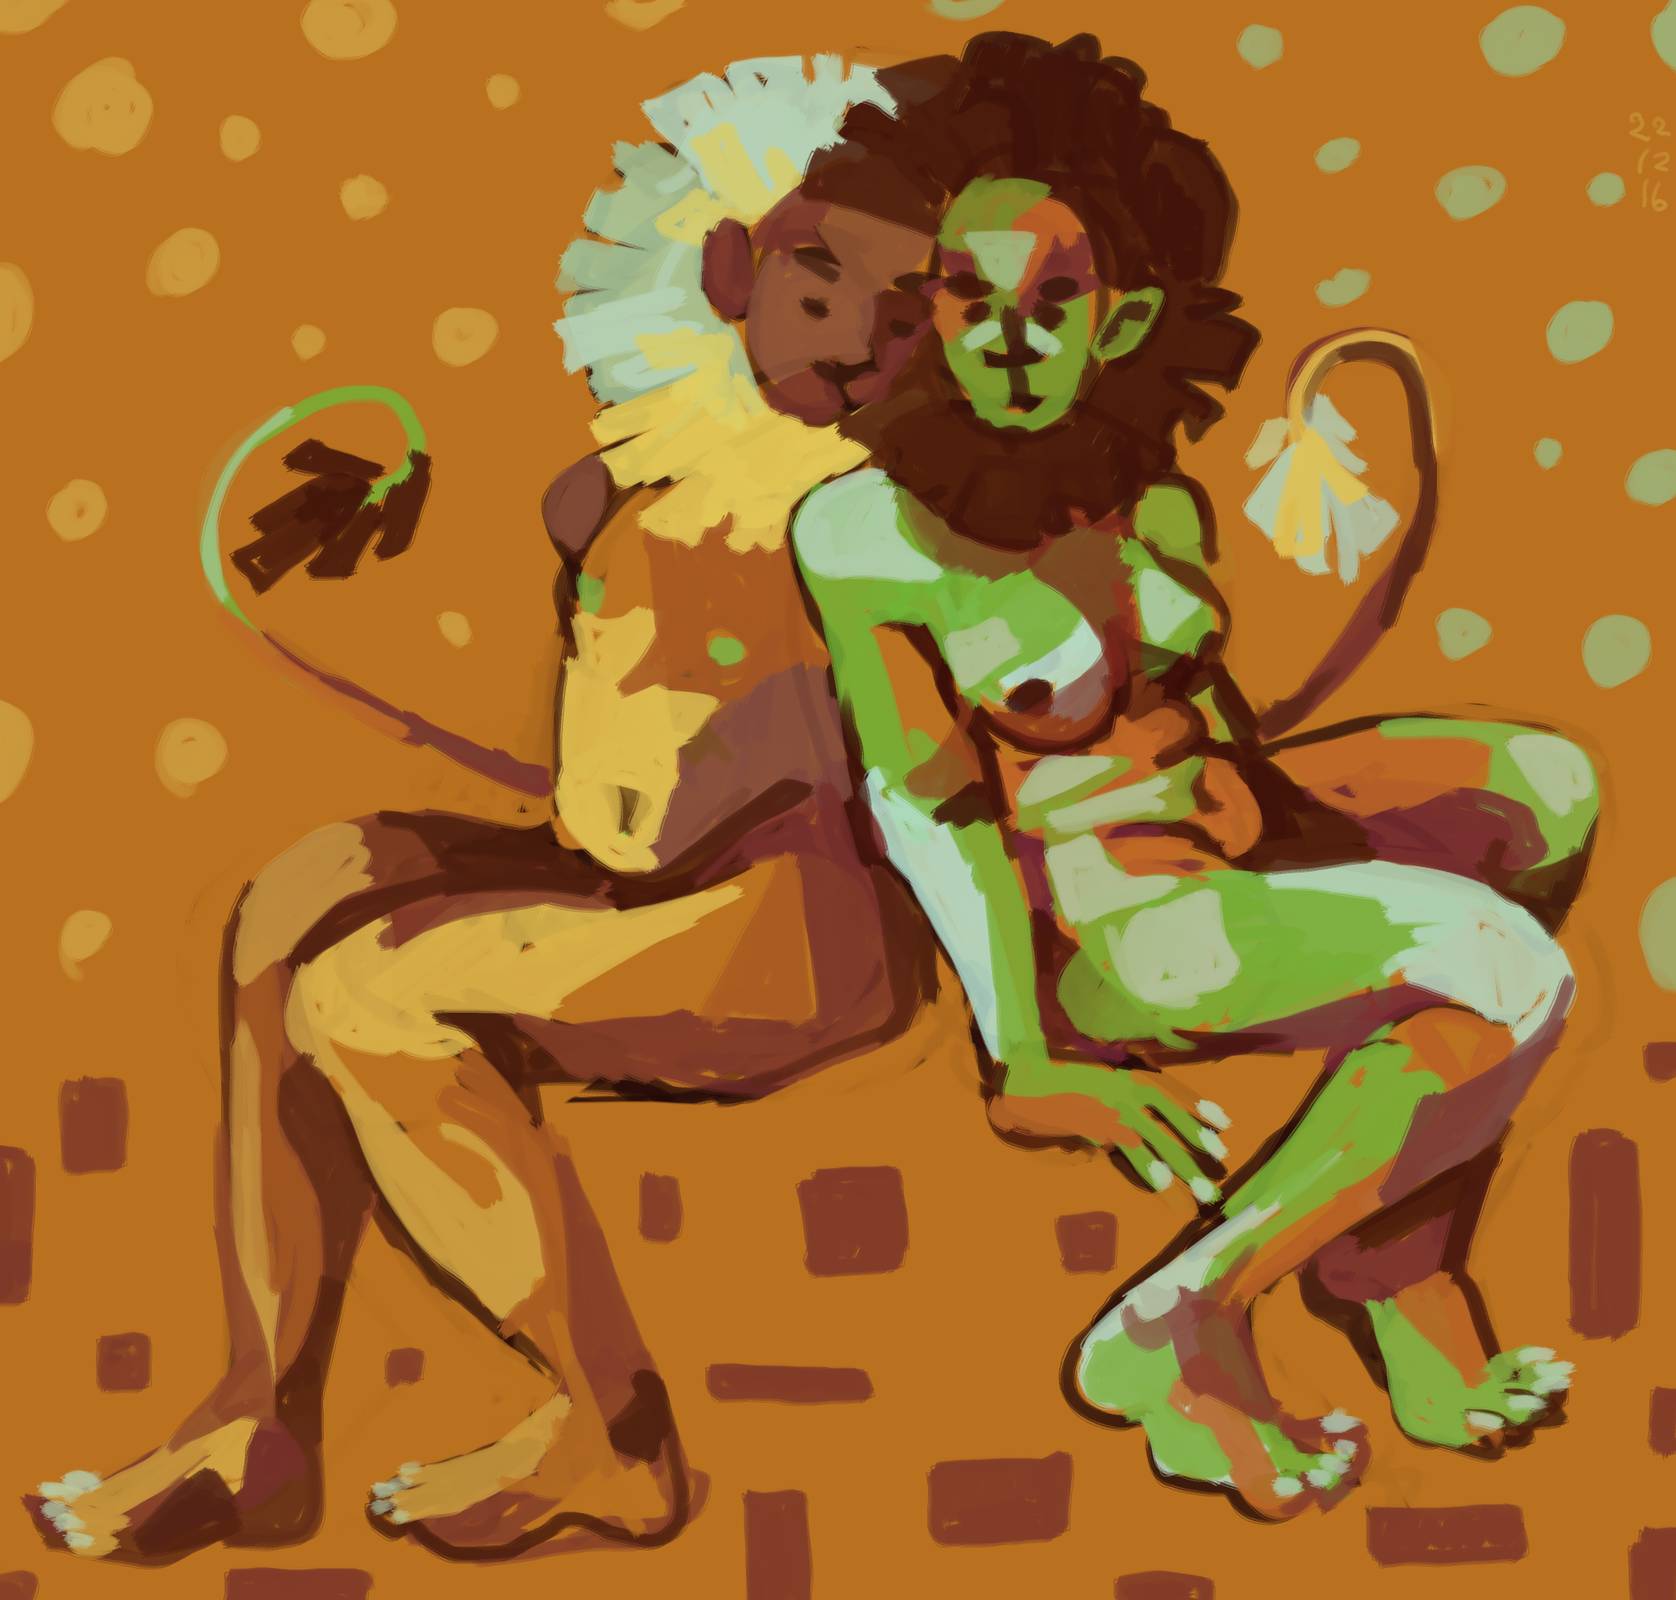 Orange humanoid lion sitting next to green humanoid lion, leaning on each other.